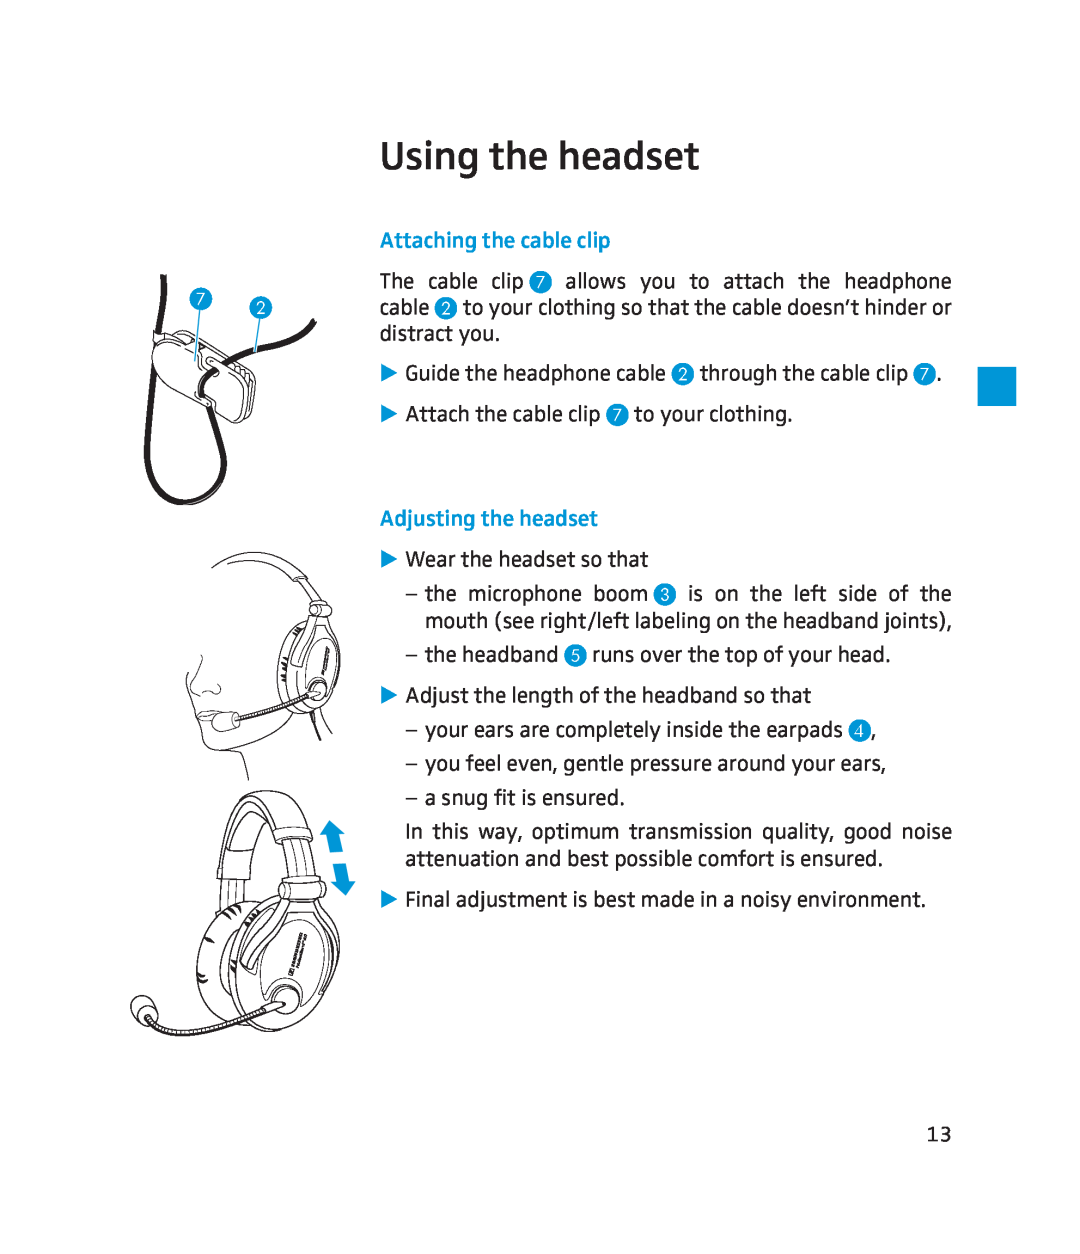 Sennheiser HMEC 250 instruction manual Using the headset, Attaching the cable clip, Adjusting the headset 